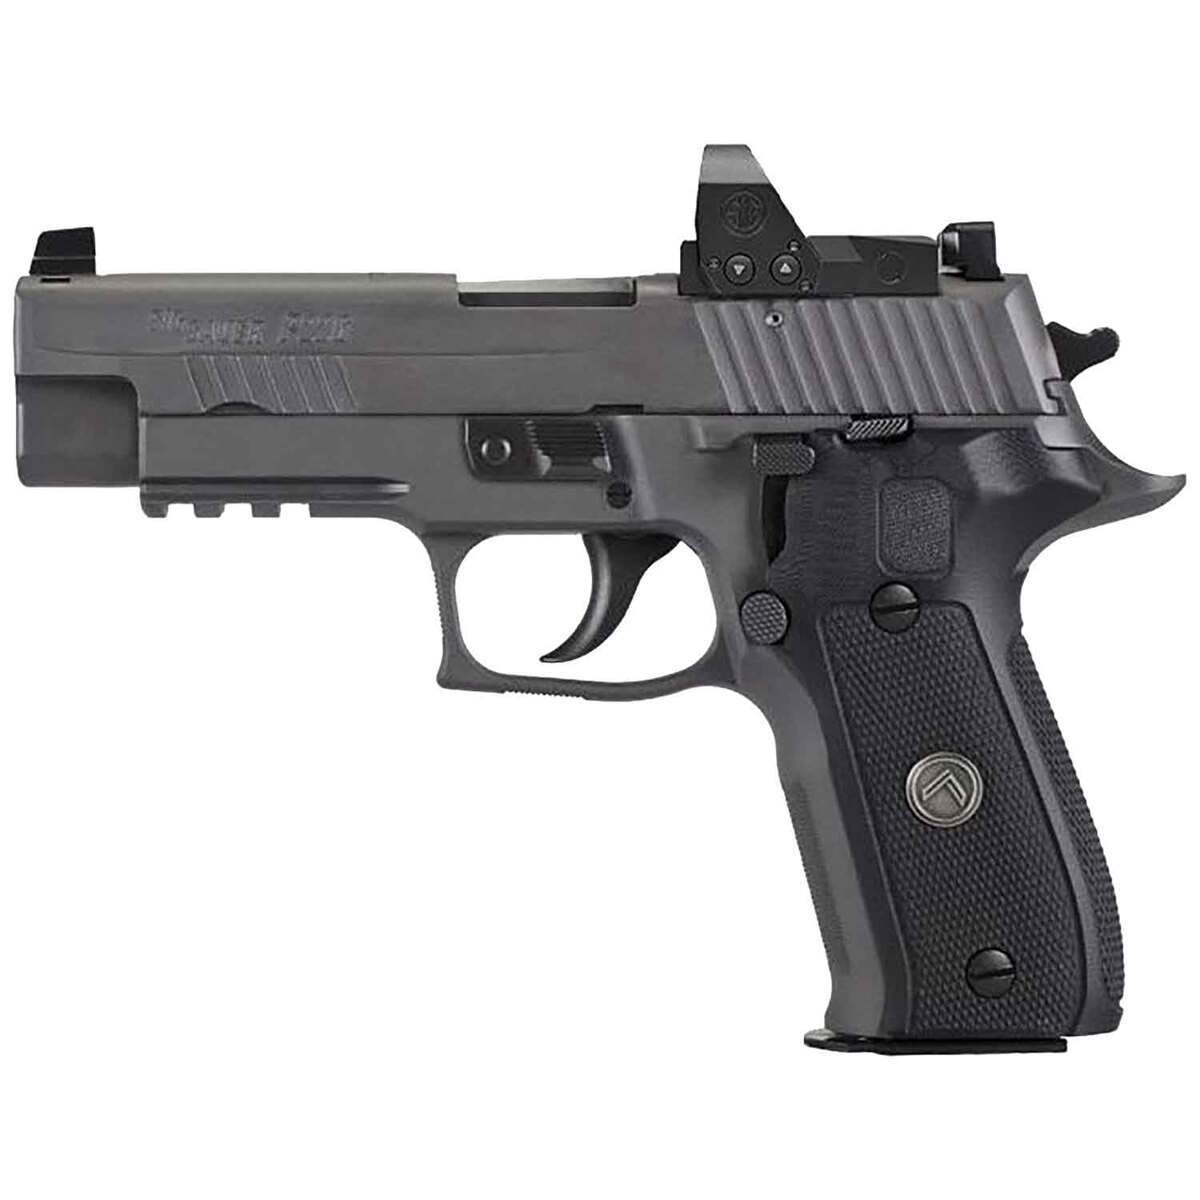 Sig Sauer P226 Legion RXP Review: Pros and cons of the P226 Legion RXP